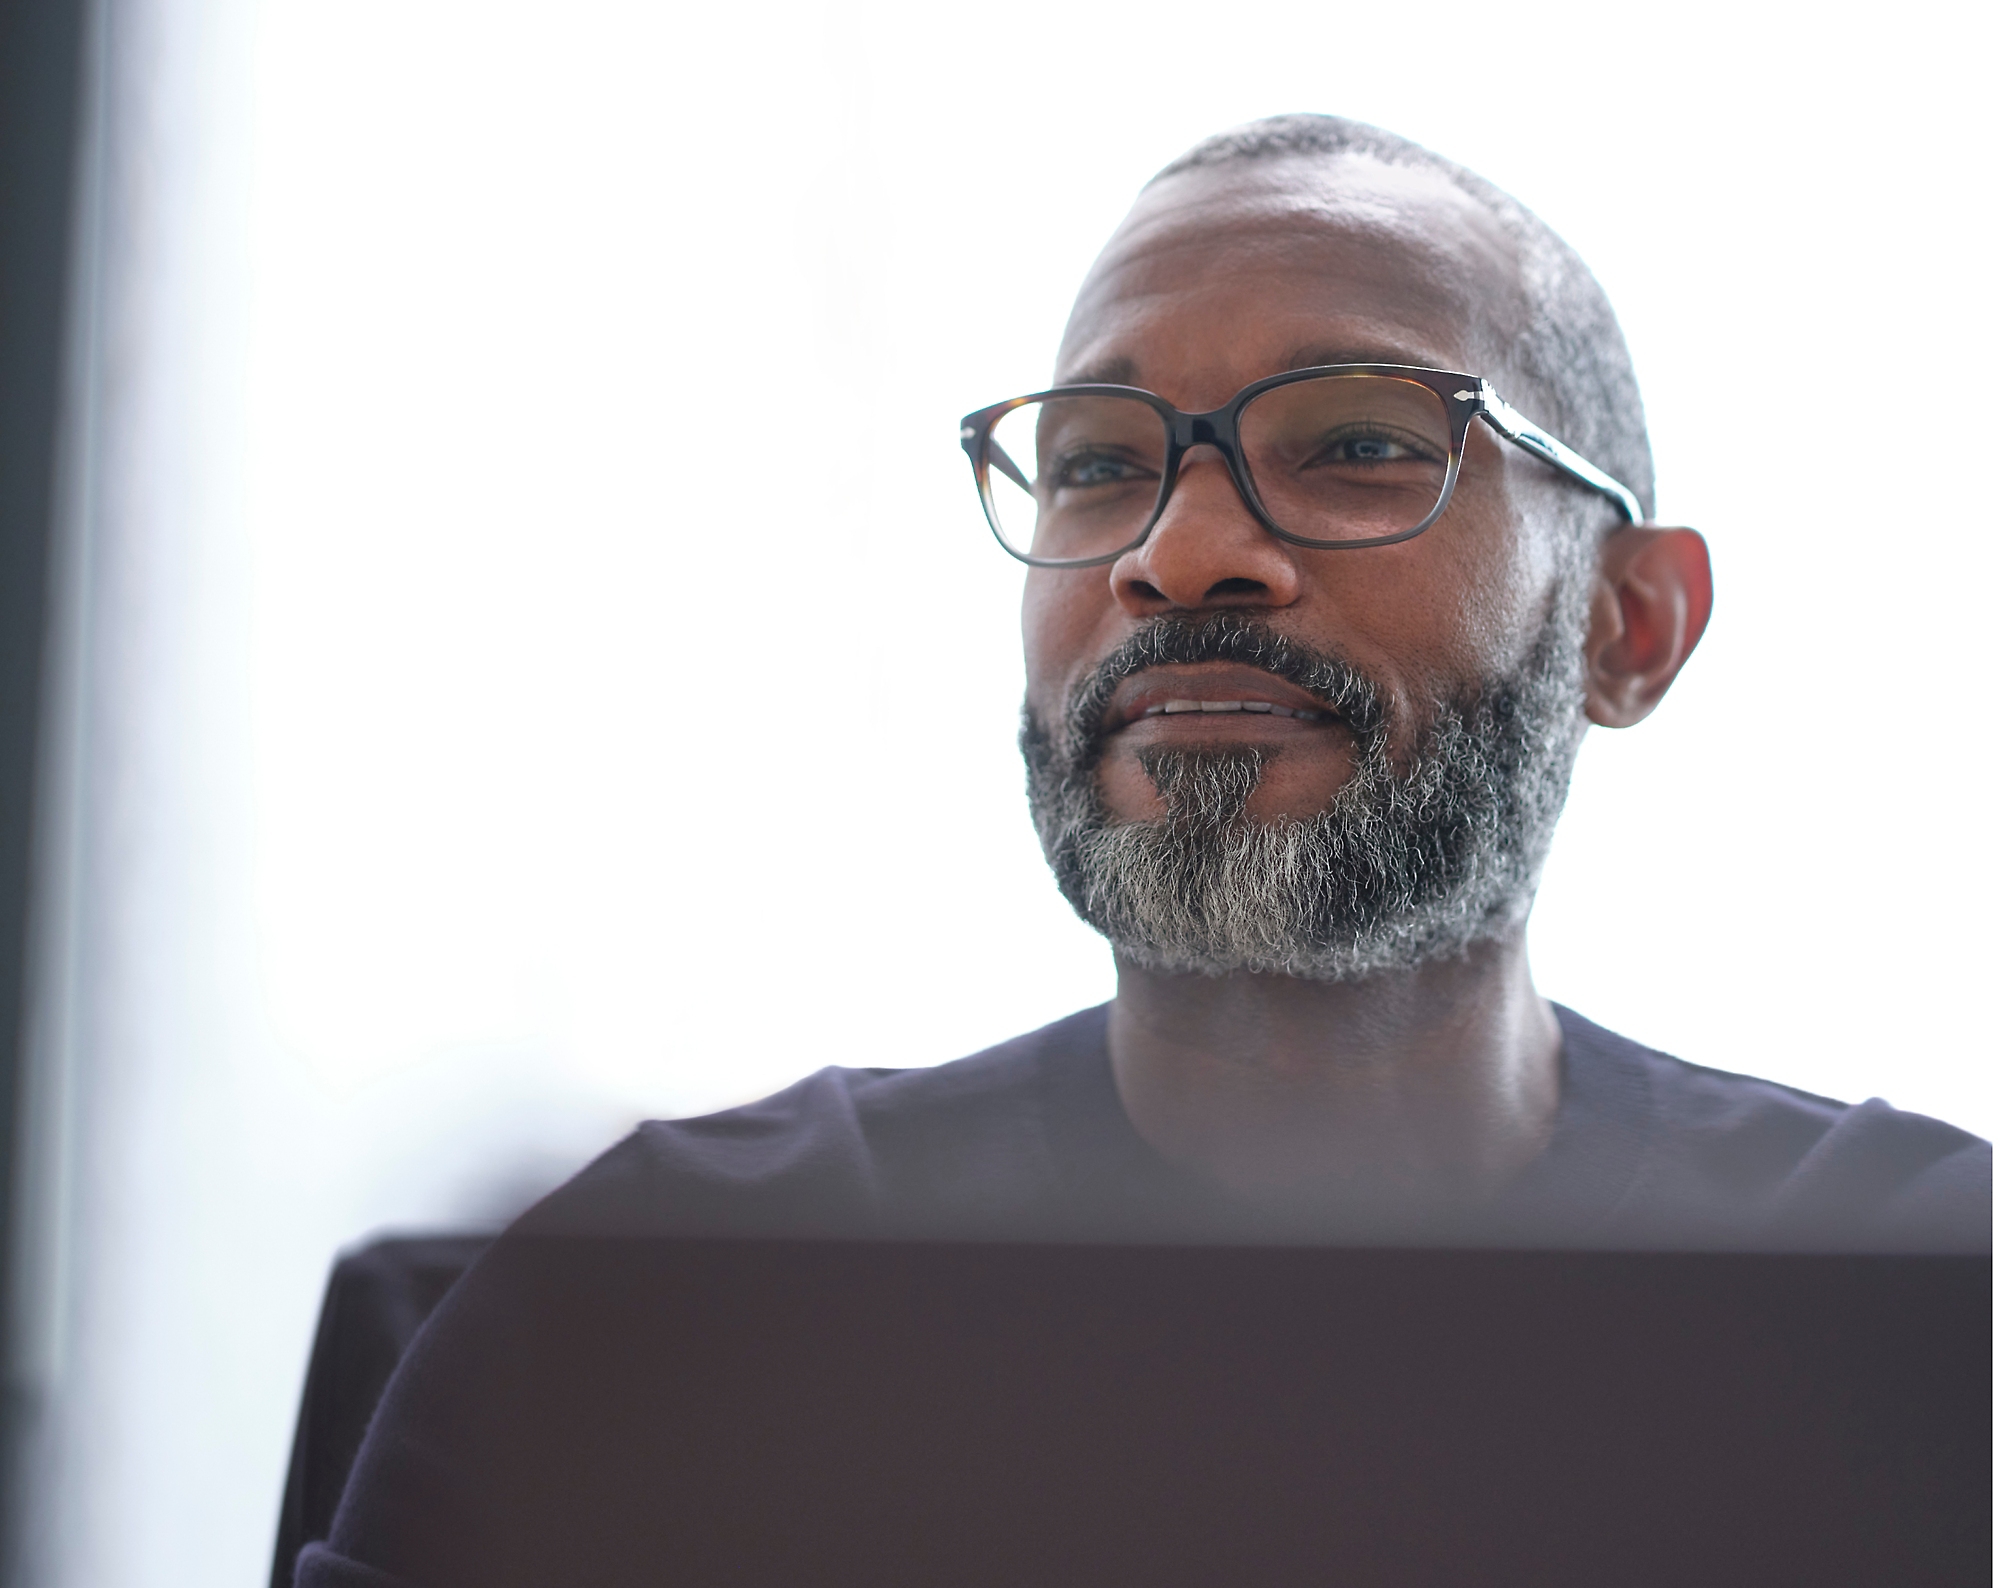 A man with glasses and a beard looking out over his laptop